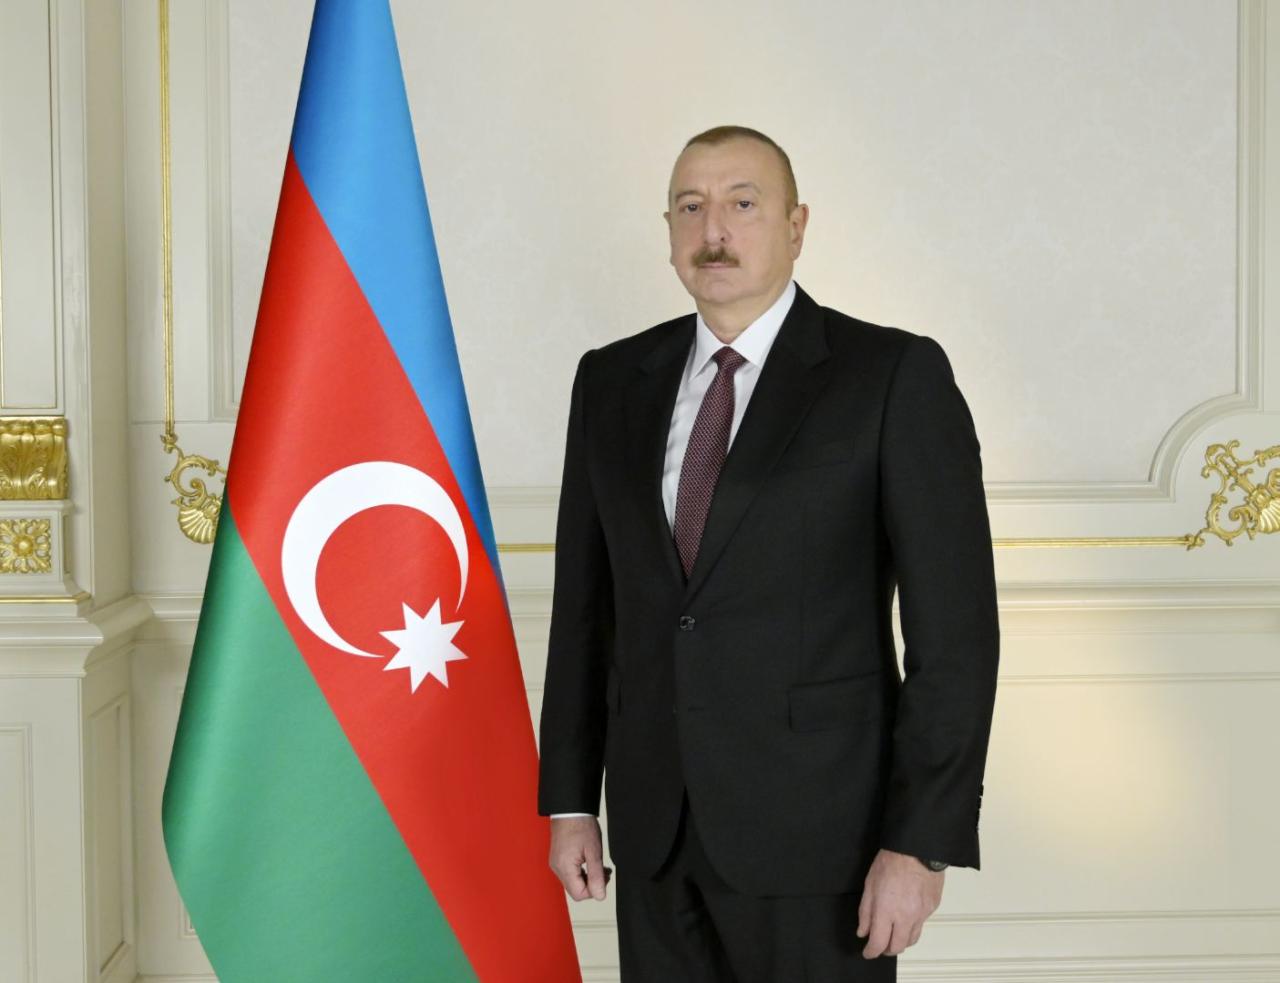 President Ilham Aliyev forever inscribed his name in Azerbaijan's history through liberating Karabakh from Armenian occupation - Israeli experts